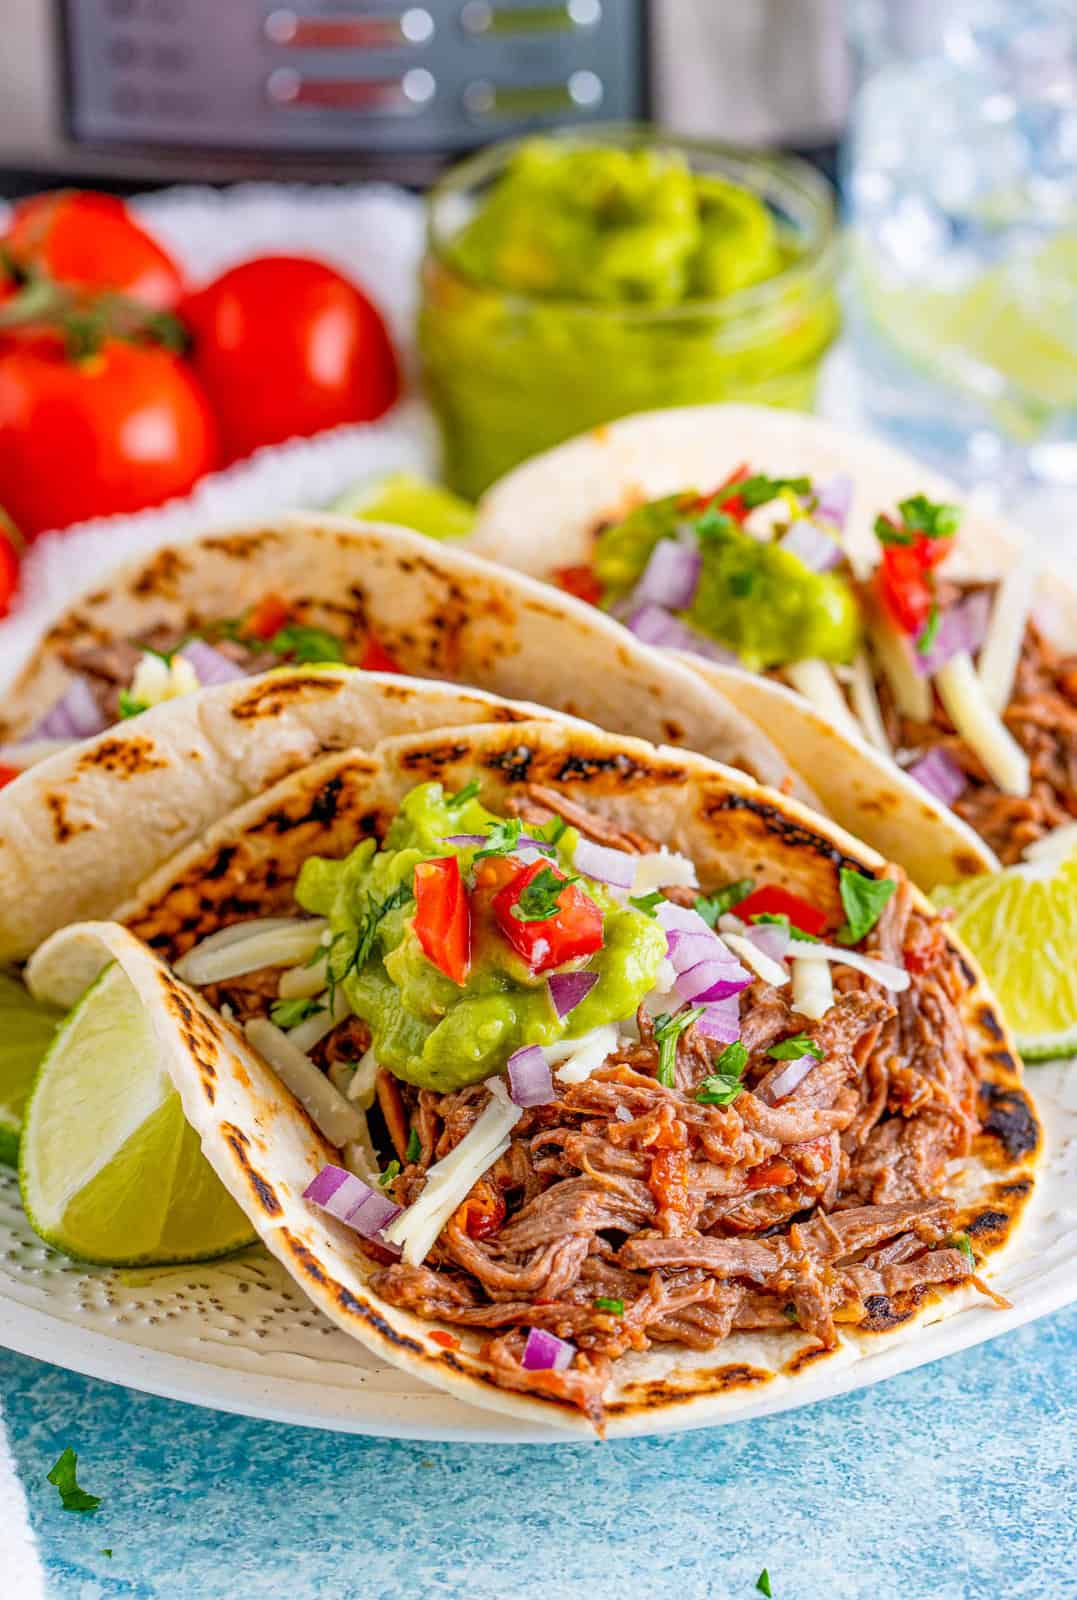 Slow Cooker Shredded Beef Tacos on plate with toppings and a lime.